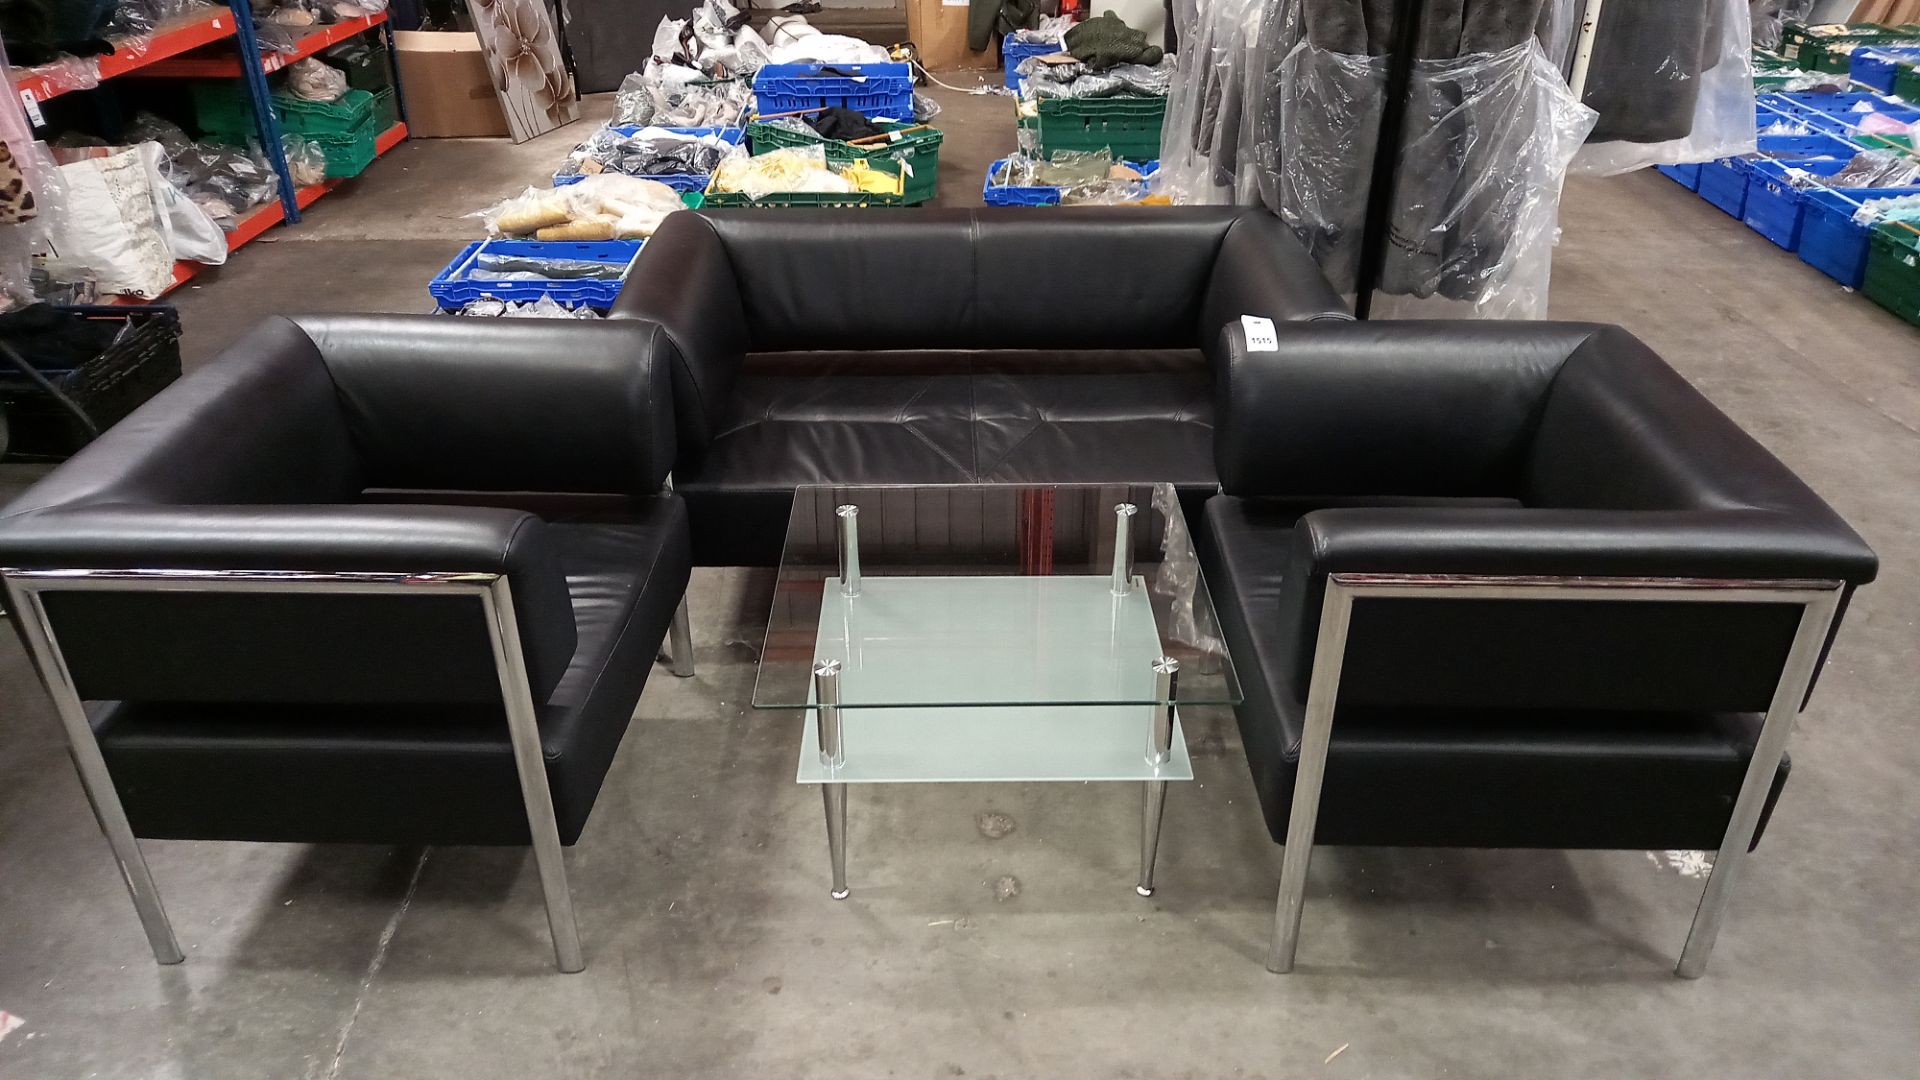 4 PIECE SOFA SET CONTAINING 2 X SINGLE SEATS, 1 X DOUBLE SEAT AND 1 X GLASS TABLE